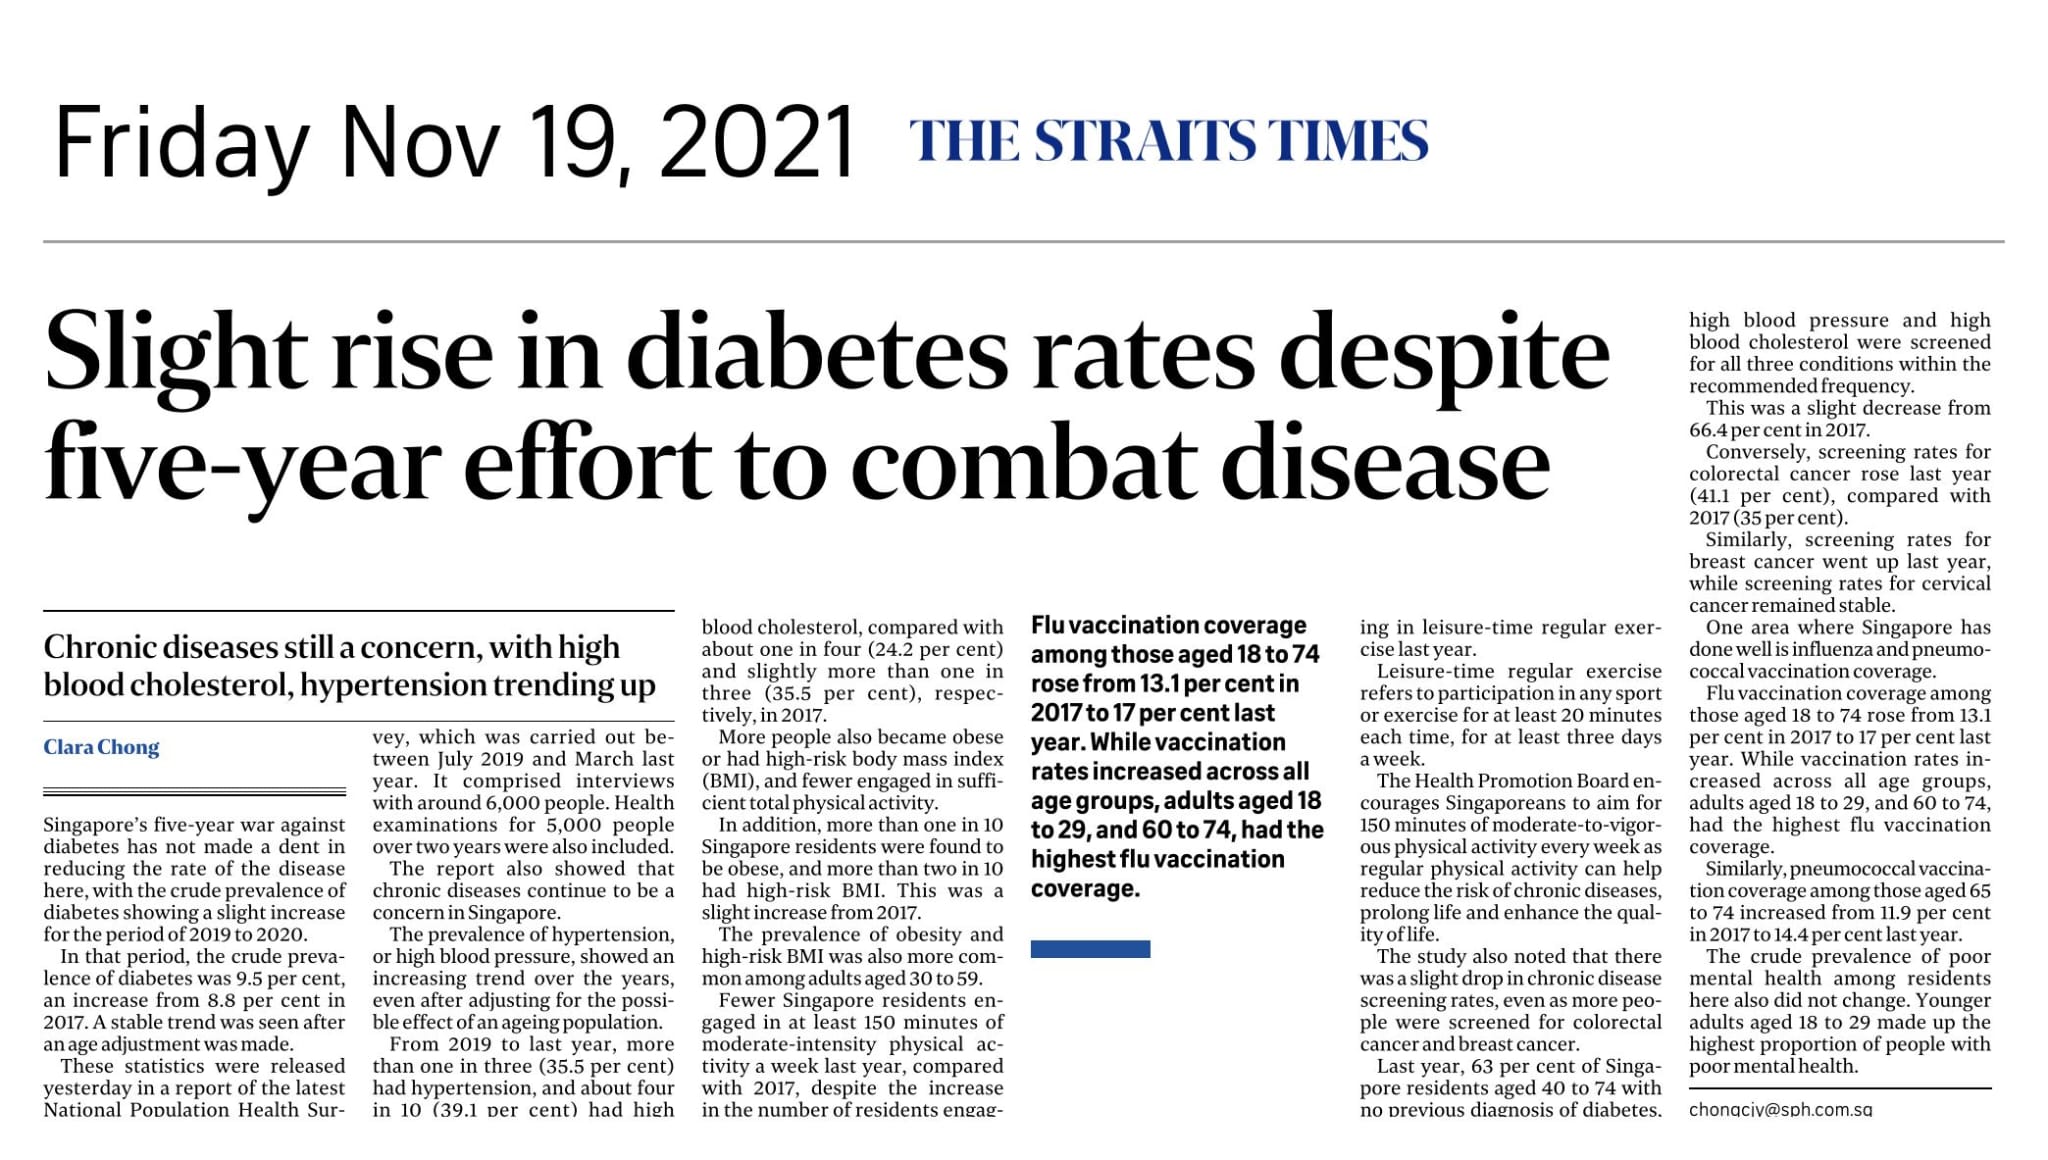 Slight Rise in Diabetes Rates Despite Five-Year Effort to Combat Disease - Published in The Straits Times Nov 19, 2021